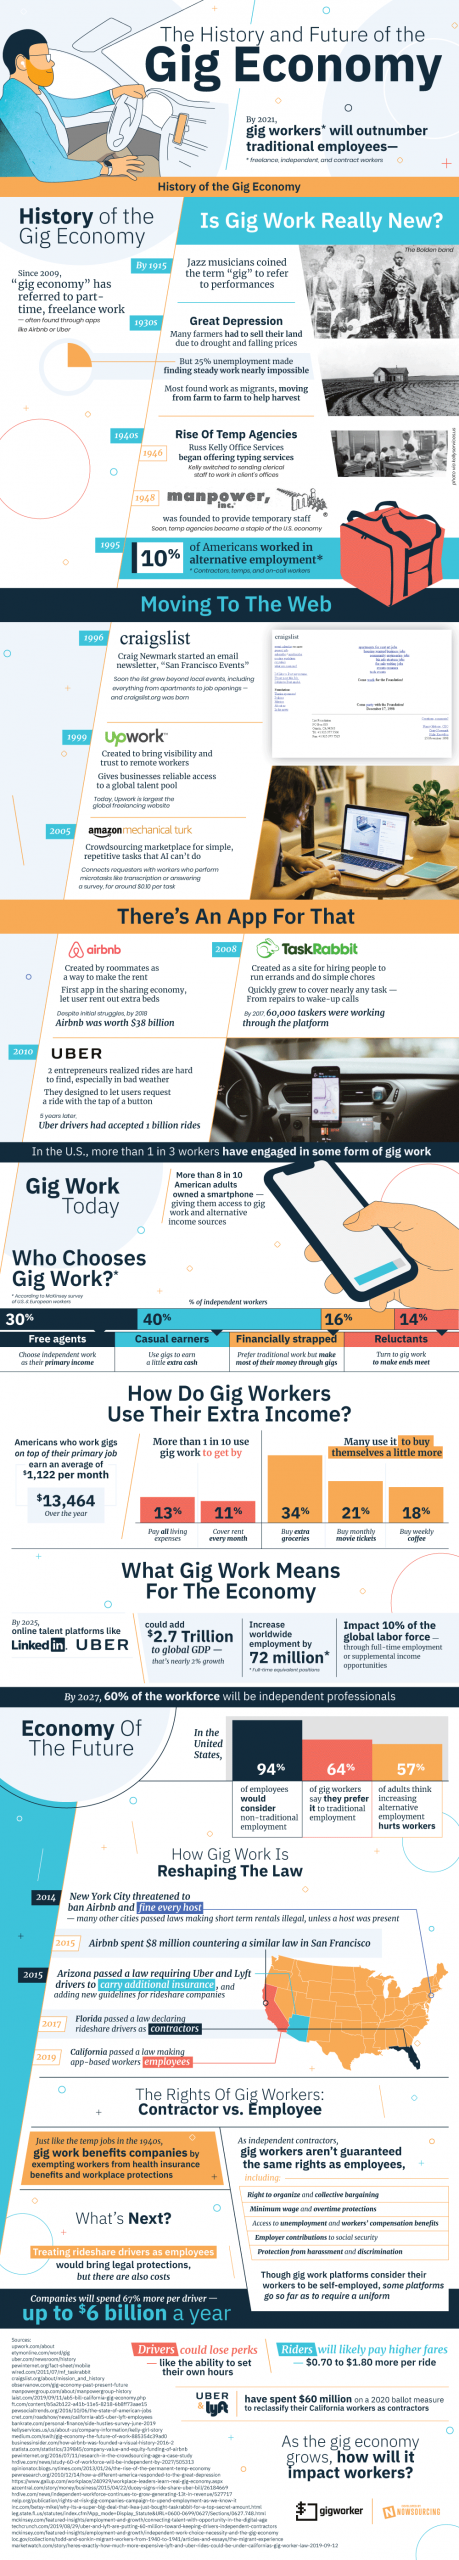 The History and Future of the Gig Economy [Infographic]